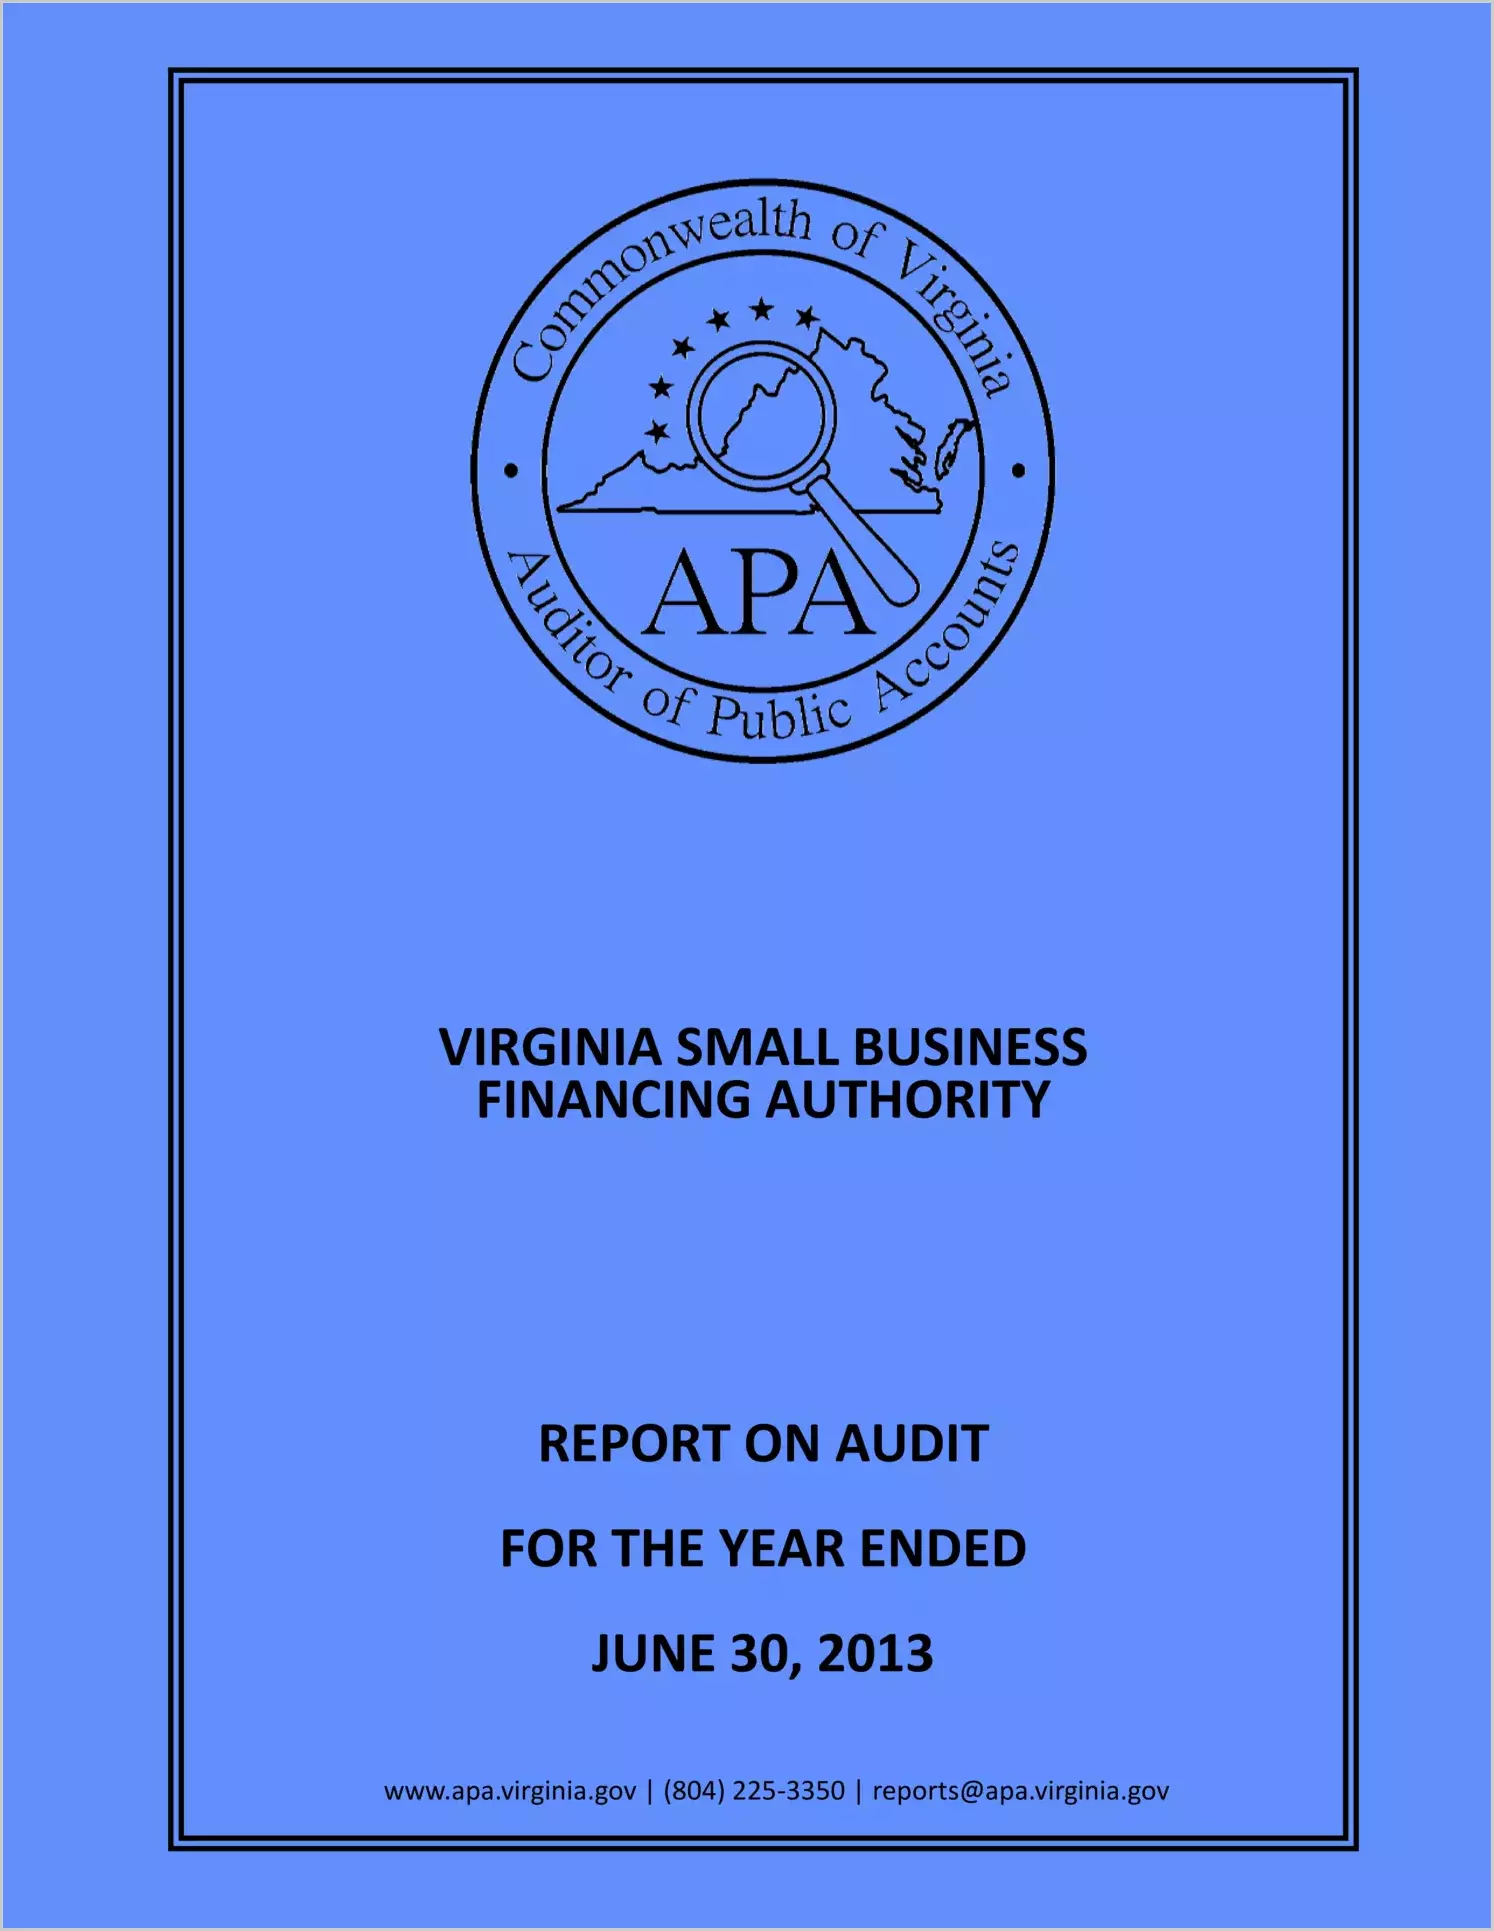 Virginia Small Business Financing Authority for the two years ended June 30, 2013